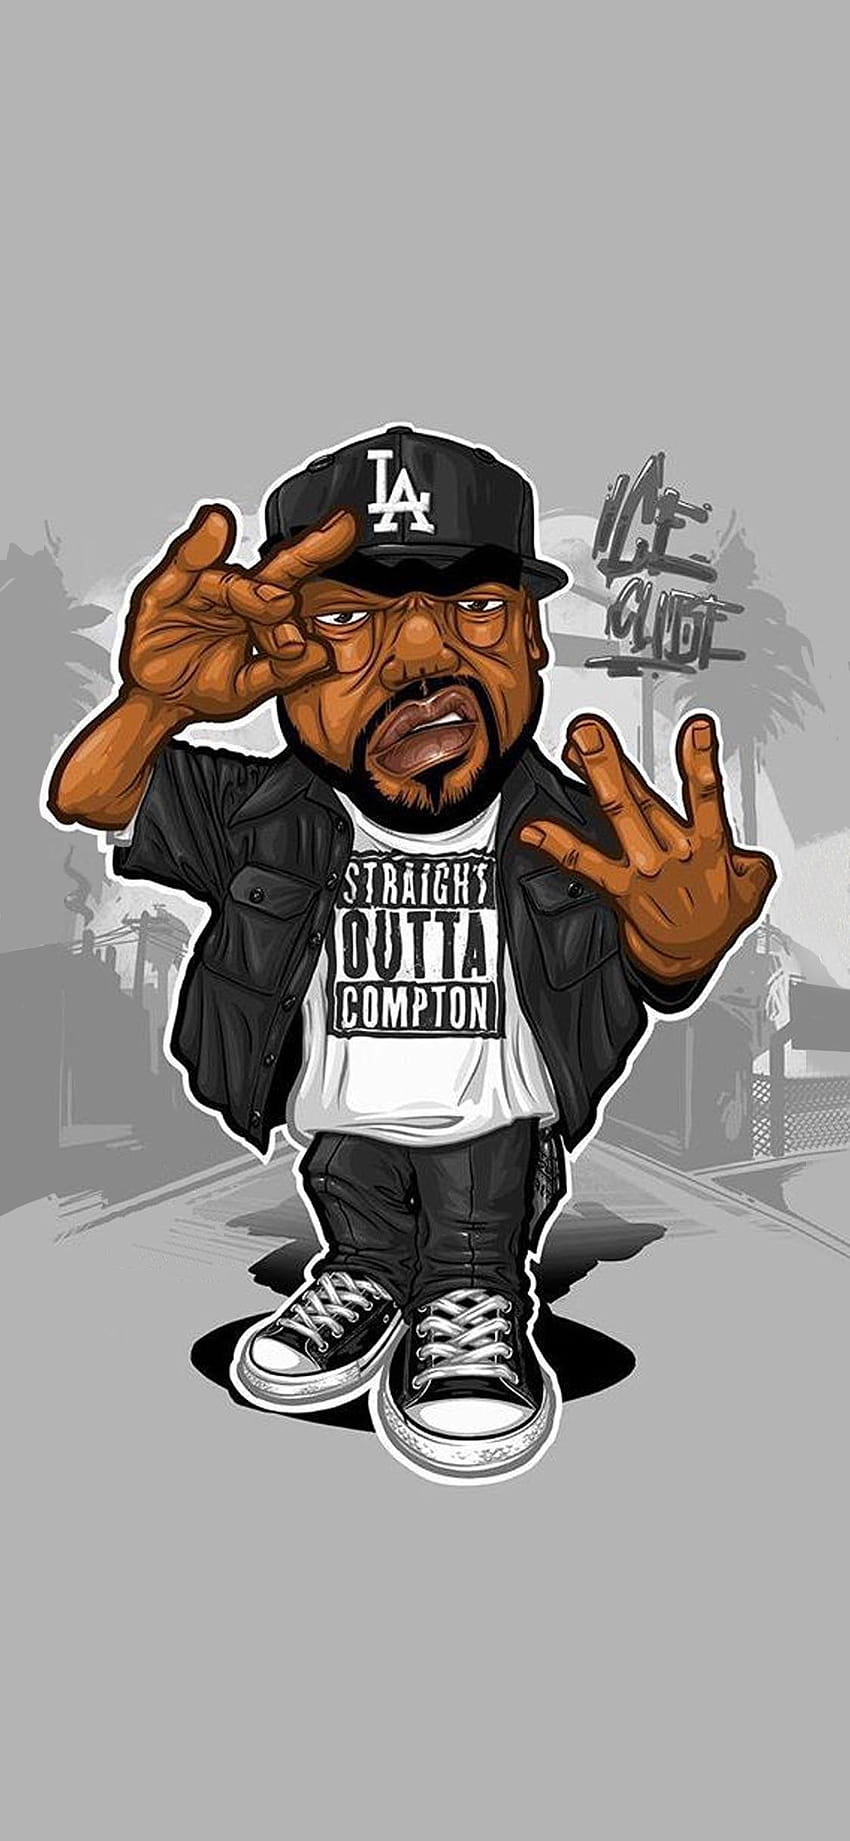 Ice Cube Art, Cropped, Chopped and Edited For iPhone Xs Max, iphone hip hop artist cartoon วอลล์เปเปอร์โทรศัพท์ HD